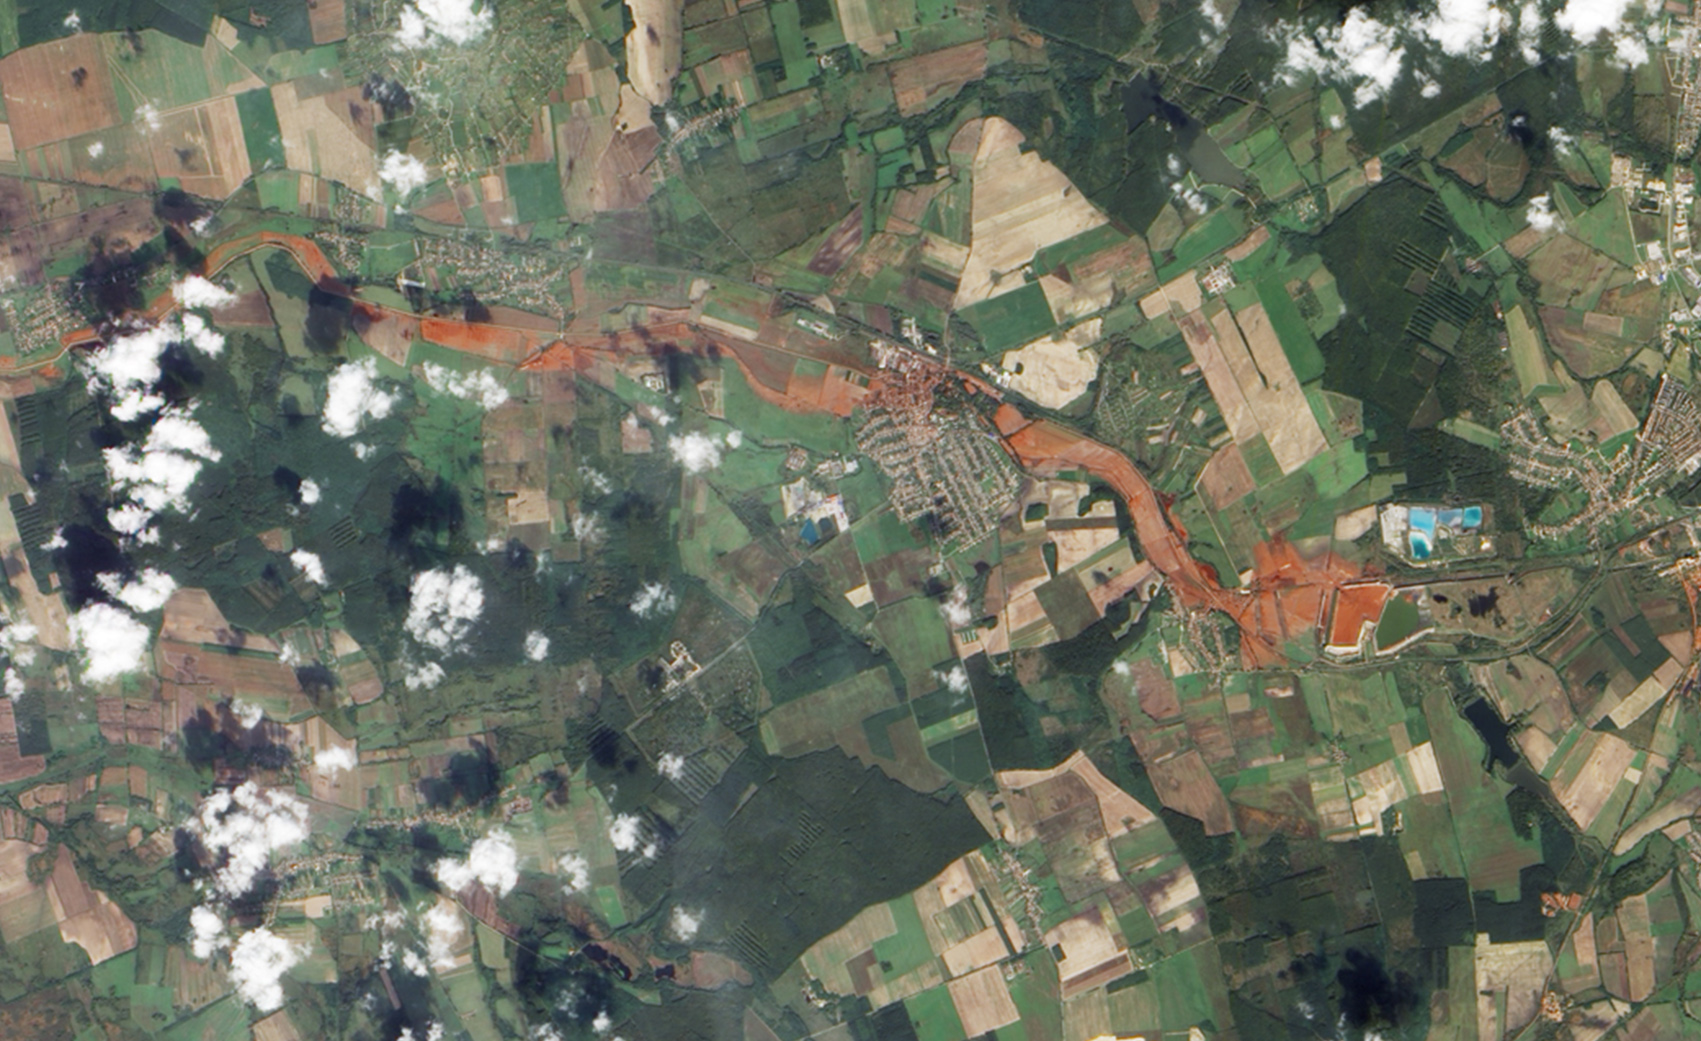 EO-1 satellite view of aluminum oxide plant spill in Hungary, October 2010